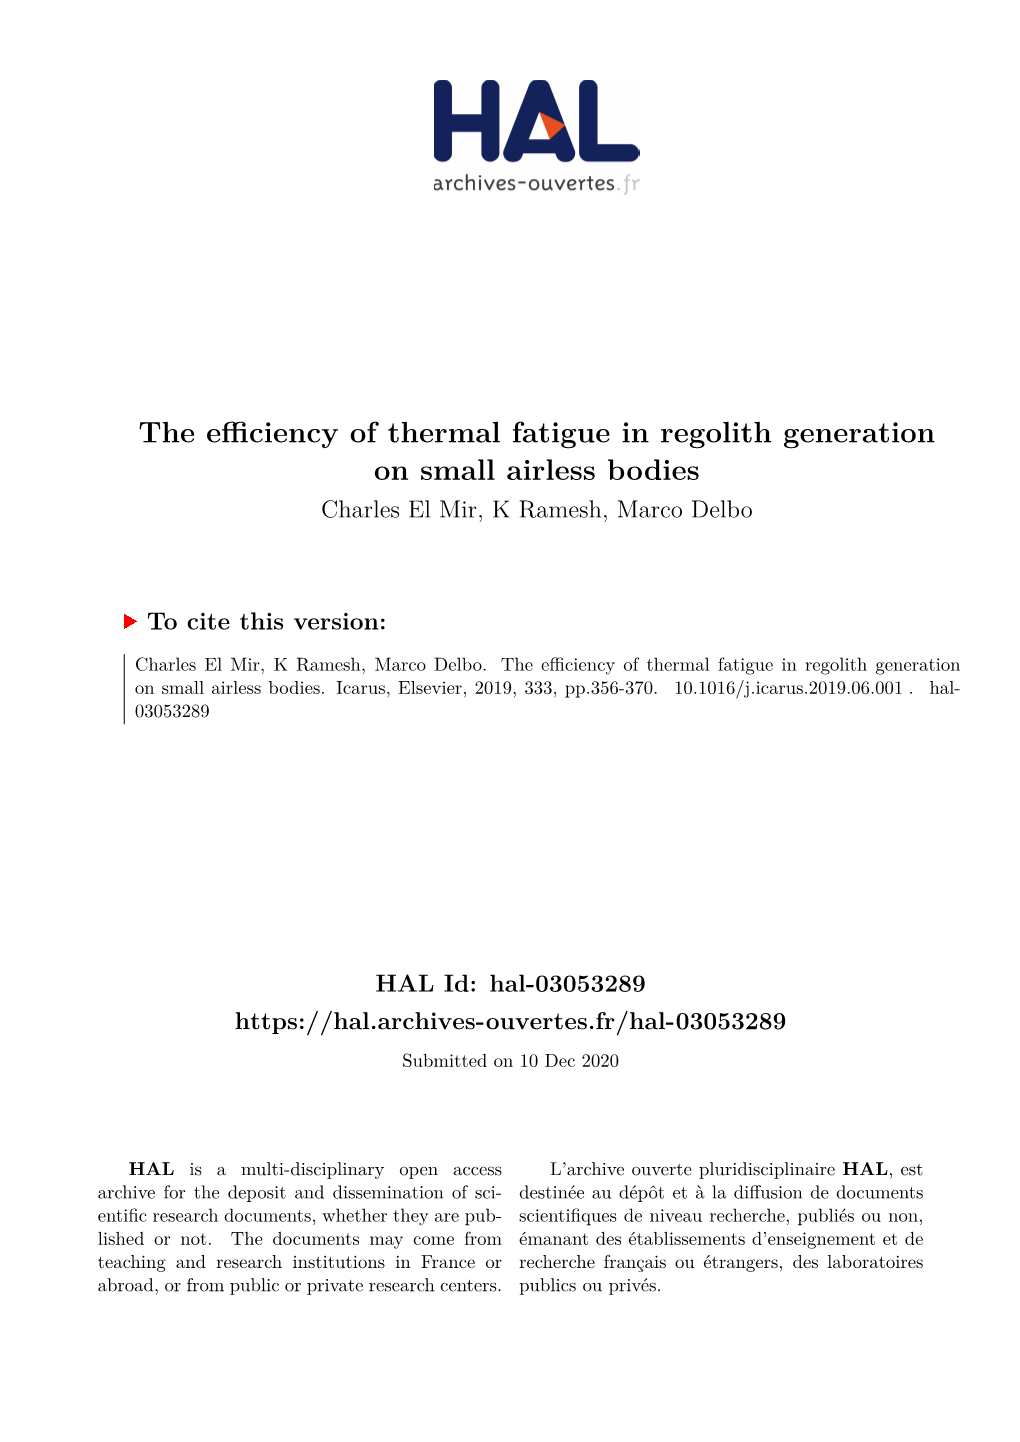 The Efficiency of Thermal Fatigue in Regolith Generation on Small Airless